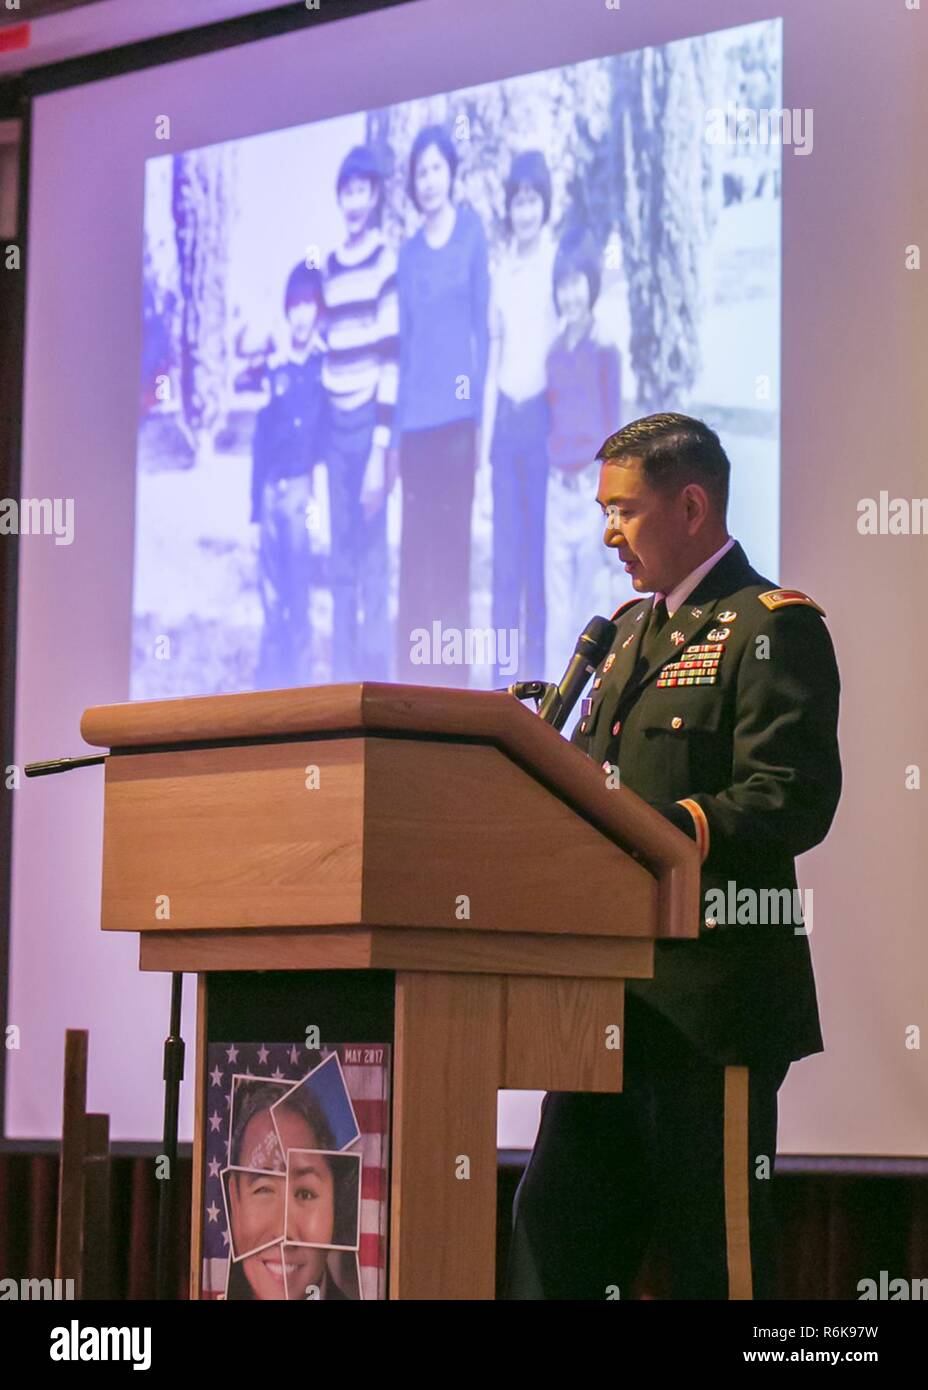 Lt. Col. Lan Dalat shares his perspective of the American Dream through his family’s story of escape from Vietnam with an audience of community members May 18, 2017 for the Asian American Pacific Islander Heritage Month Observance at Camp Zama Community Club. Stock Photo